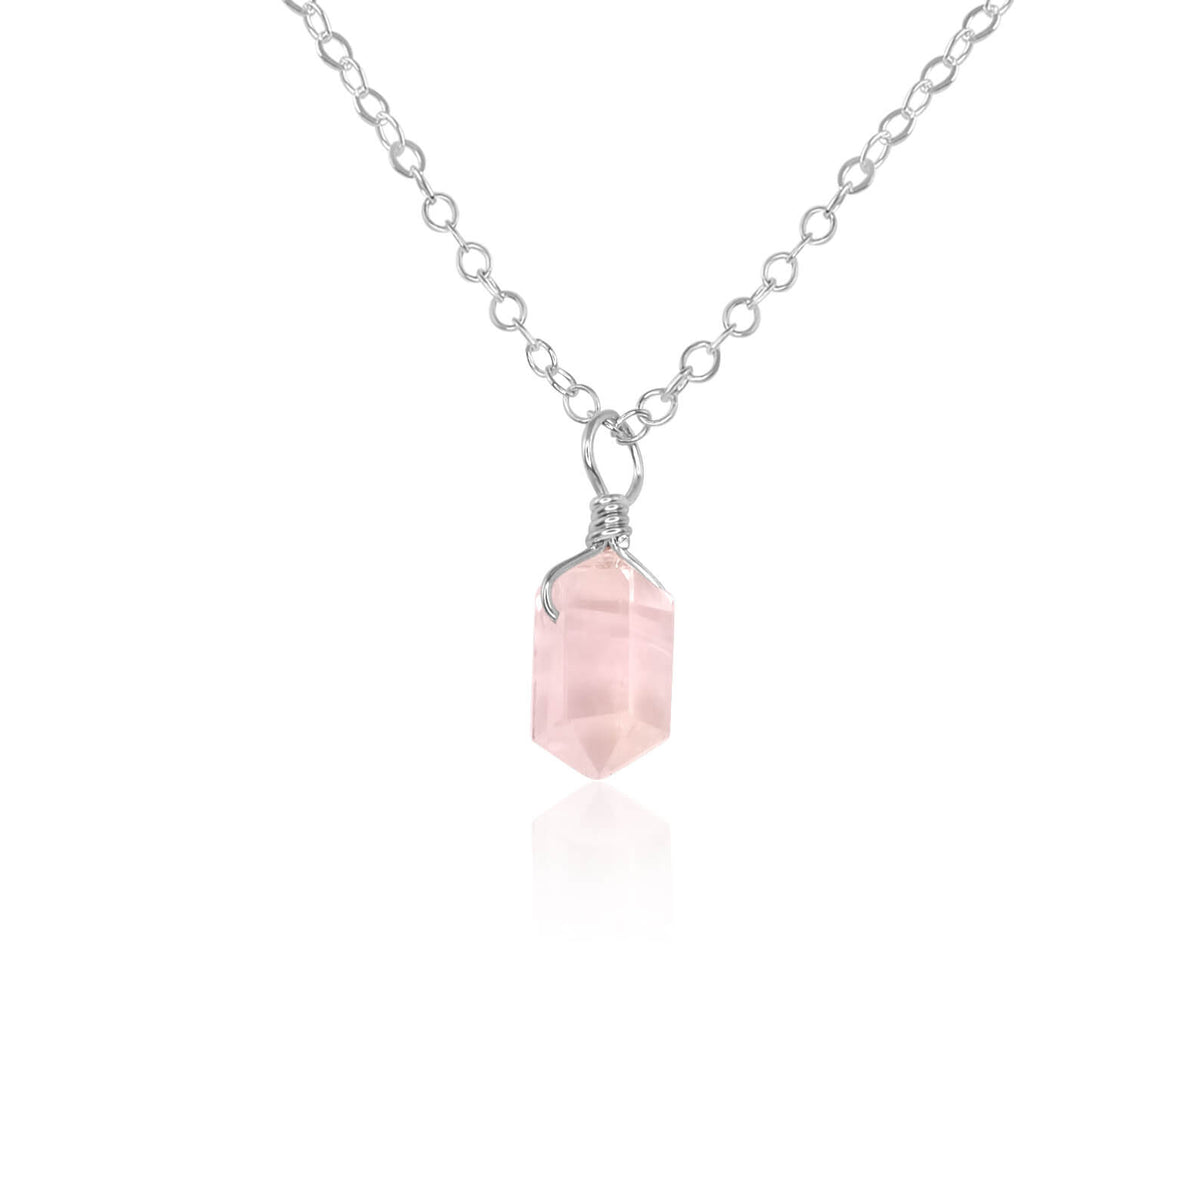 Double Terminated Crystal Pendant Necklace - Rose Quartz - Sterling Silver - Luna Tide Handmade Jewellery